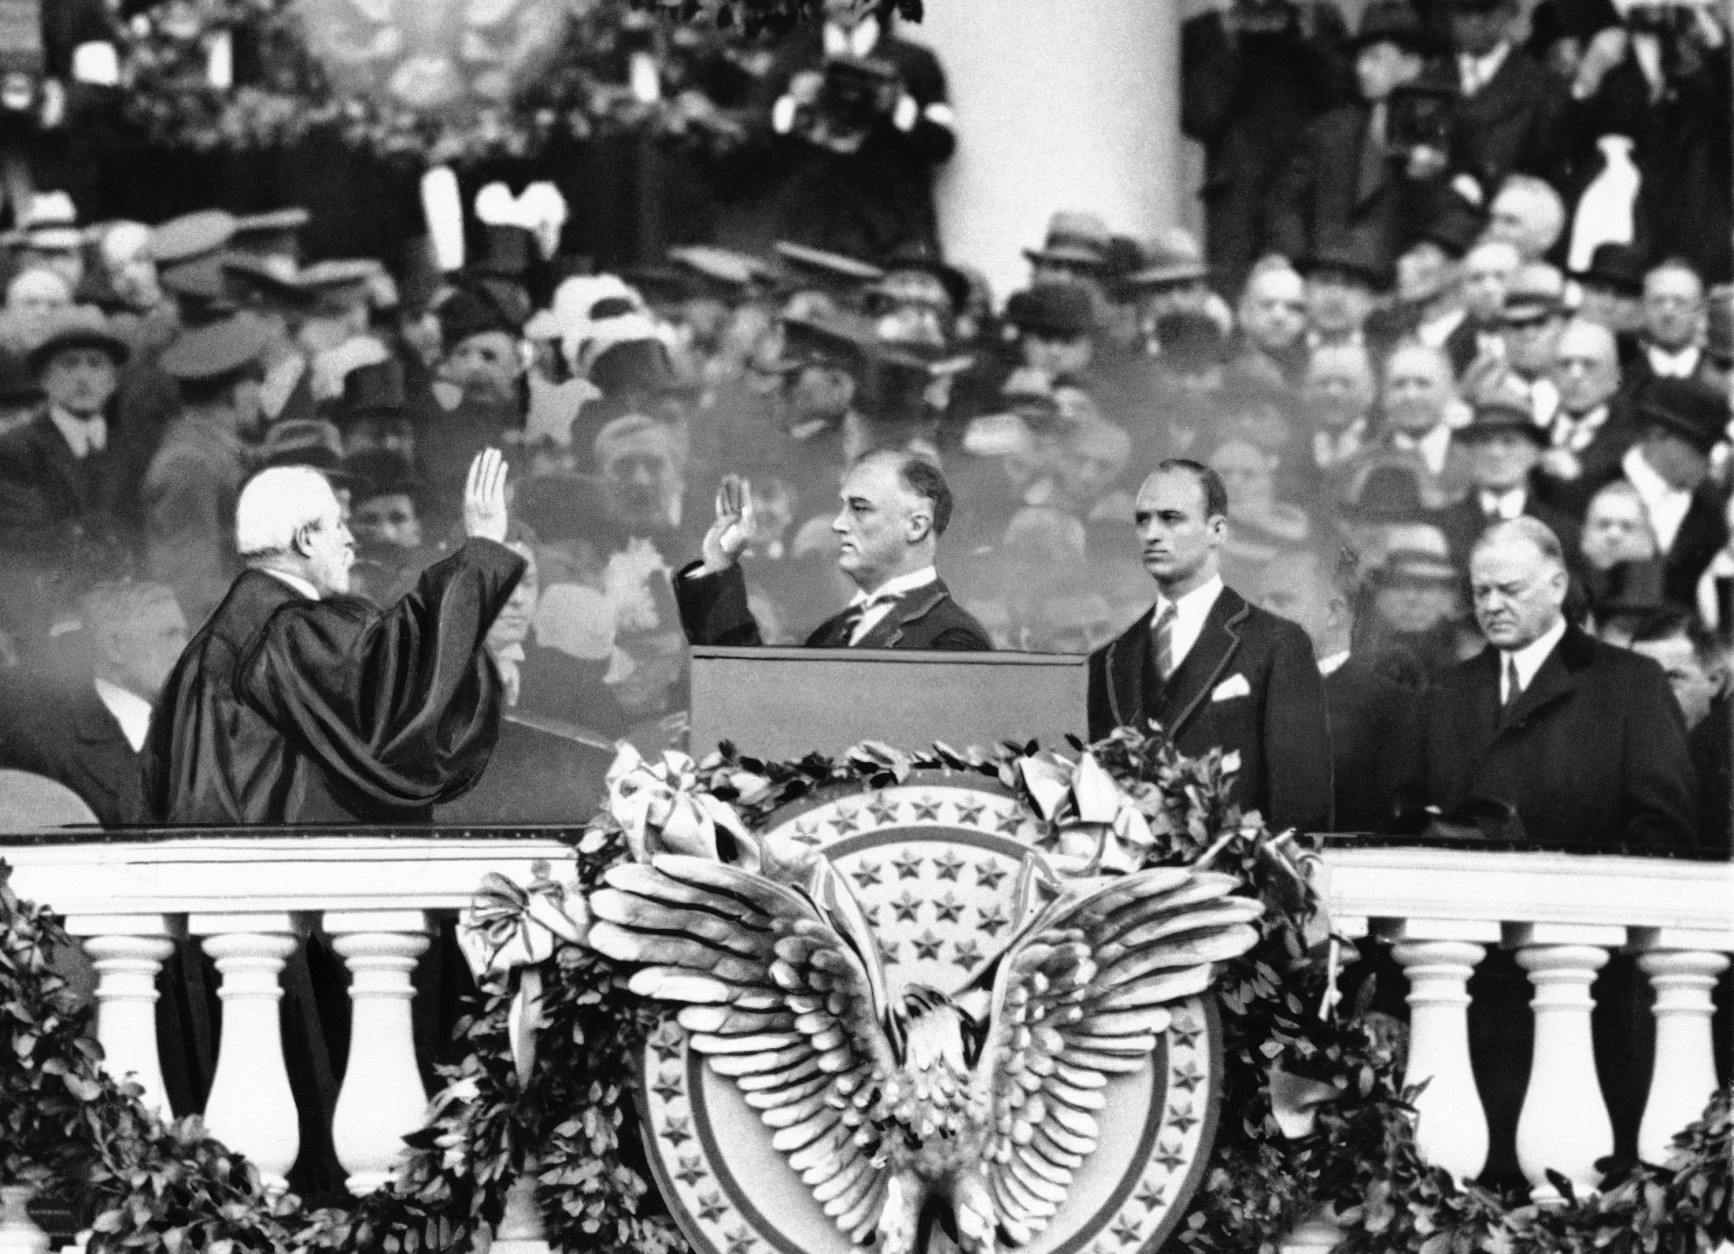 President Franklin D. Roosevelt takes the oath of office from Chief Justice Charles E. Hughes at the inauguration, March 4, 1933. At right is Herbert Hoover and behind the president is his eldest son James Roosevelt. (AP Photo)